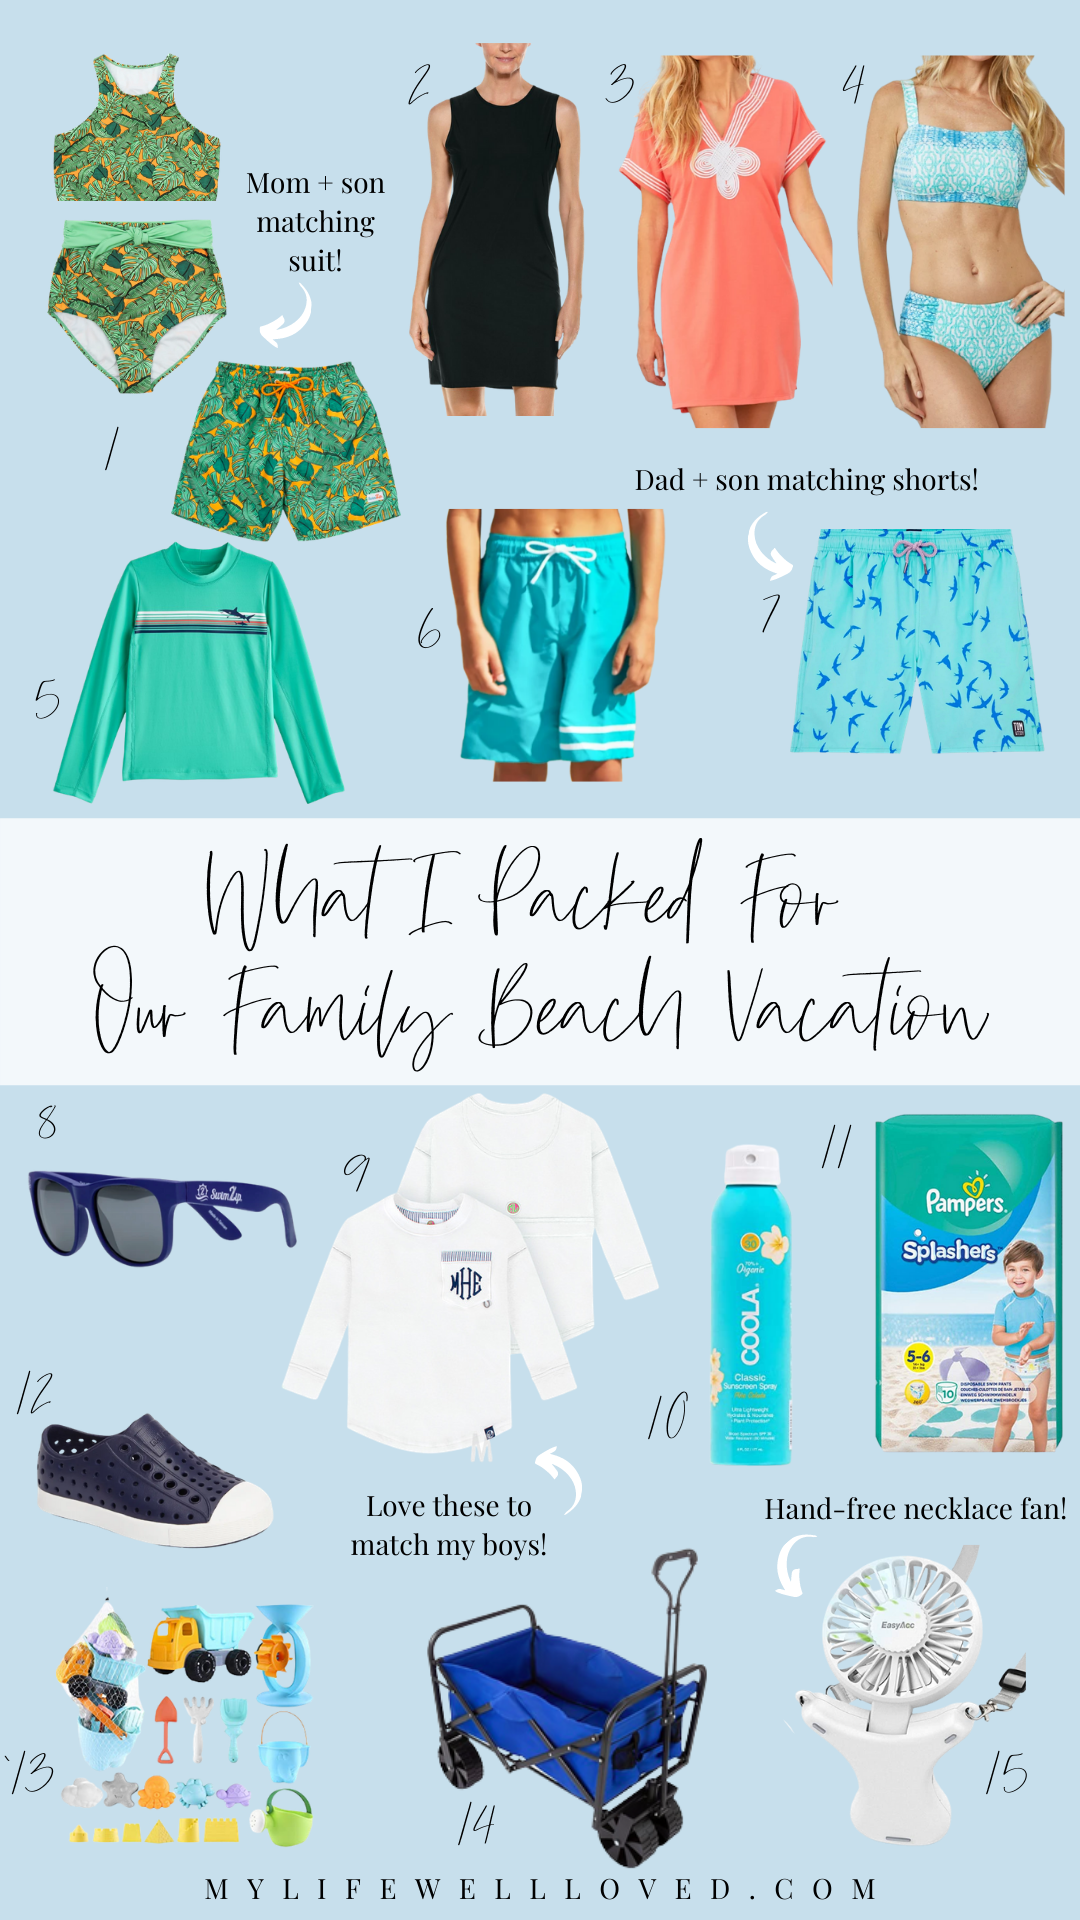 Packing List for a Weekend: How to Pack For a 3-Day Trip